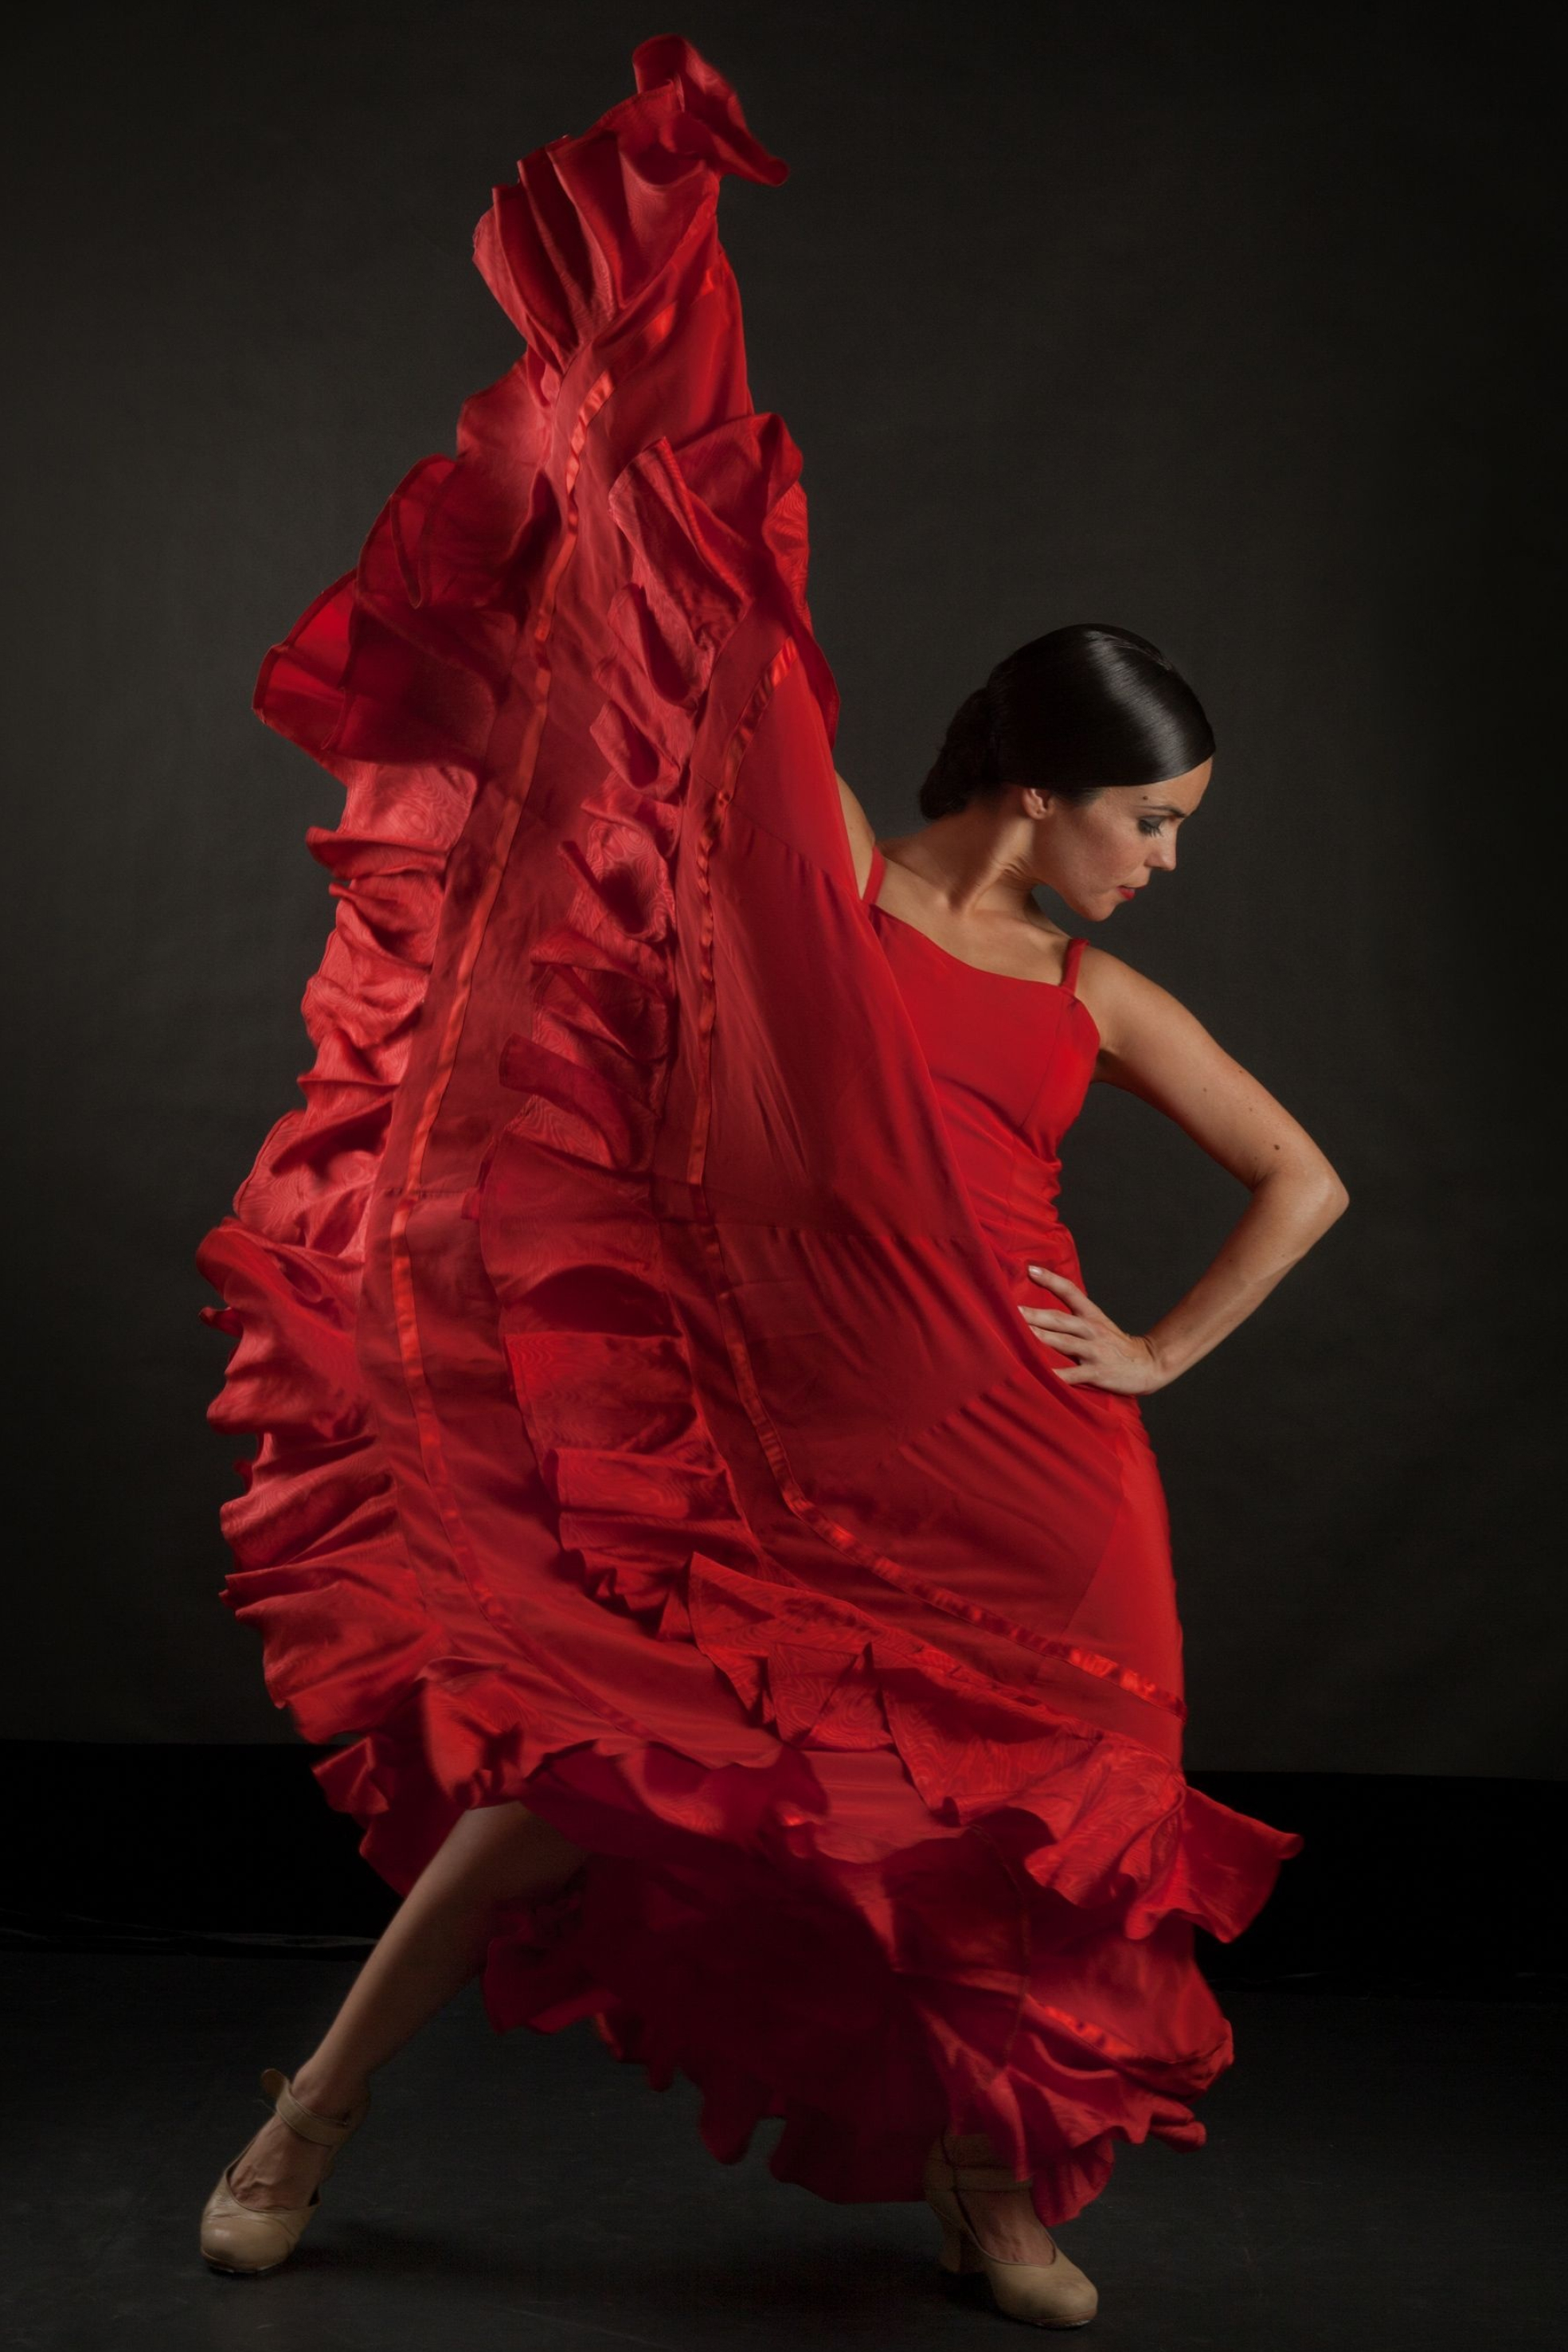 Flamenco: A highly-expressive, Spanish dance form, Hand clapping, Percussive footwork. 1970x2960 HD Wallpaper.